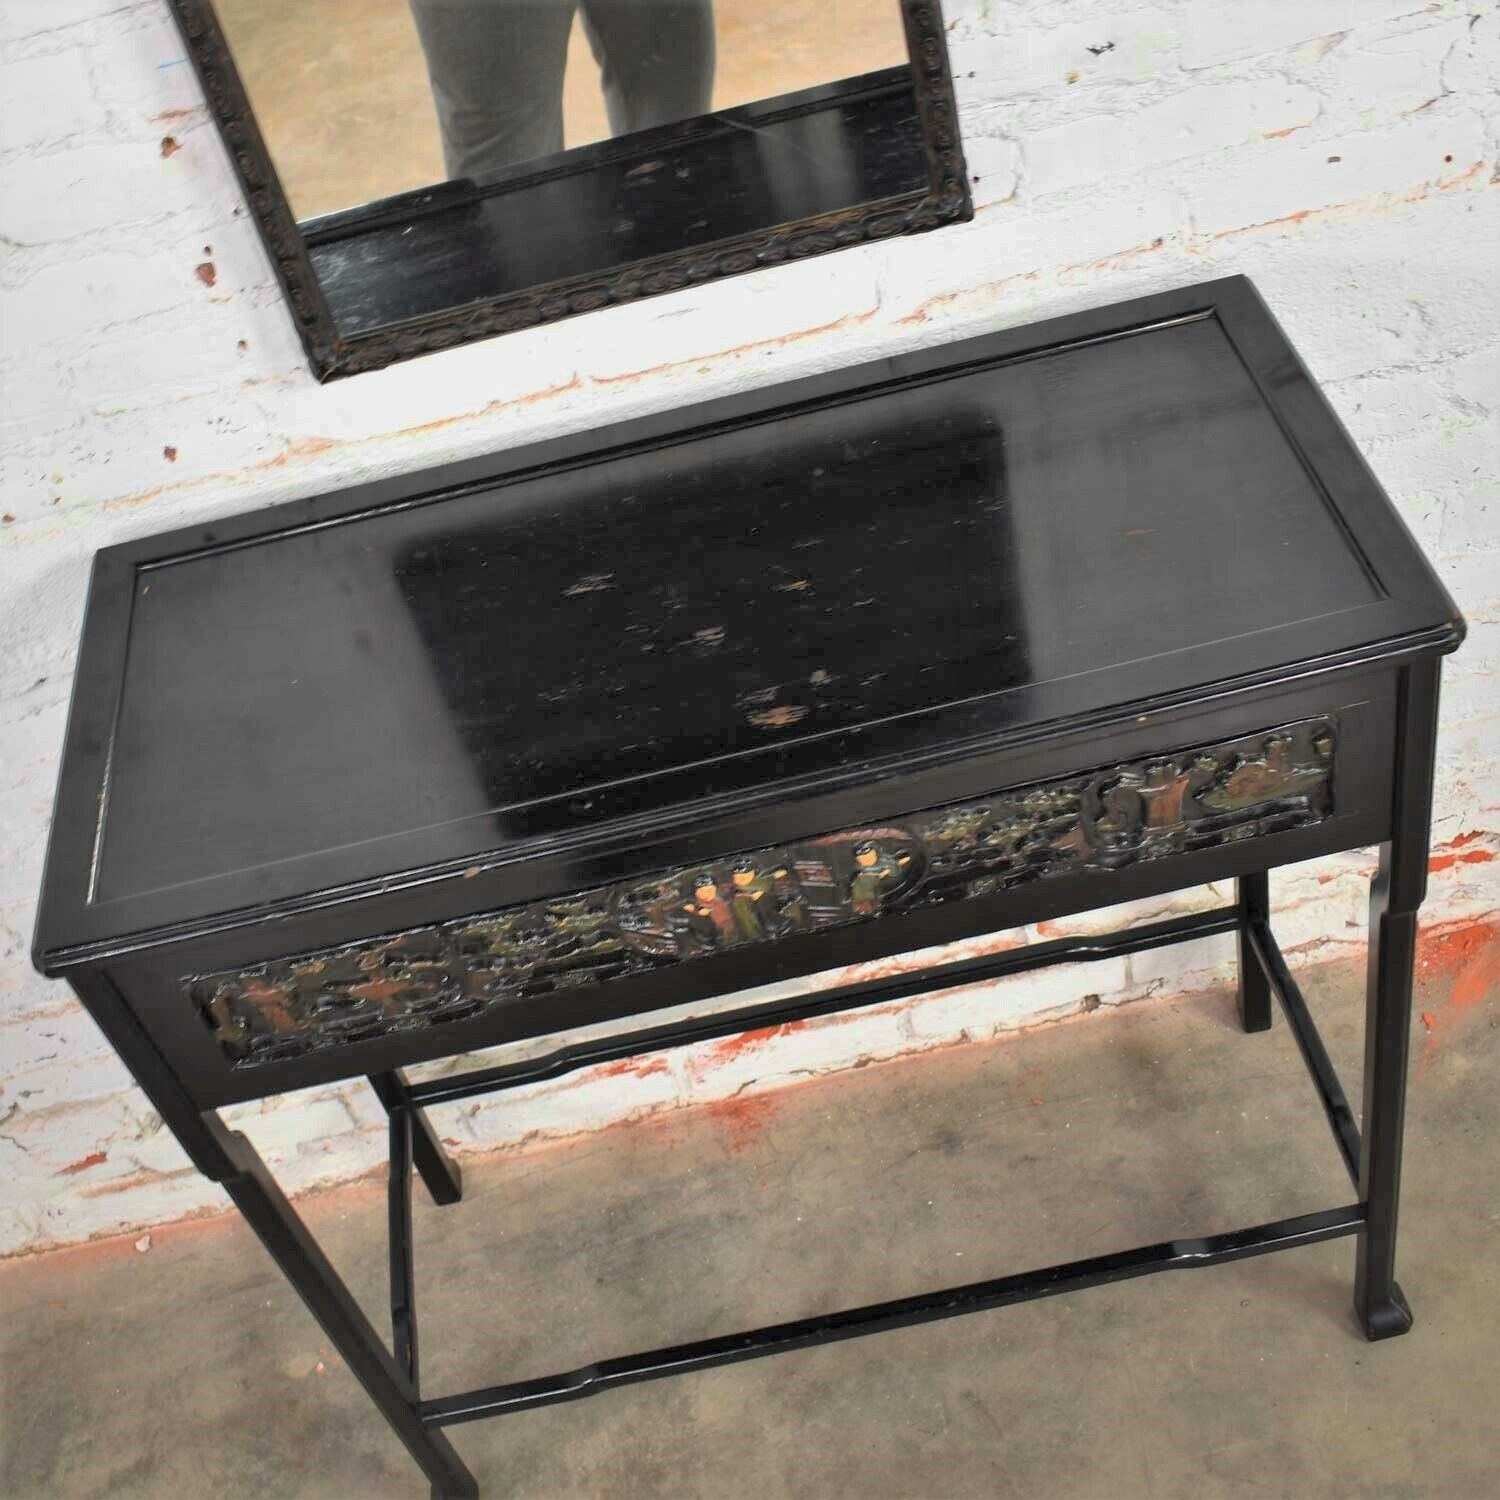 Antique Lacquered Asian Console Table & Mirror w/ Hand Carved Lacquer Figures &  Без бренда - фотография #6